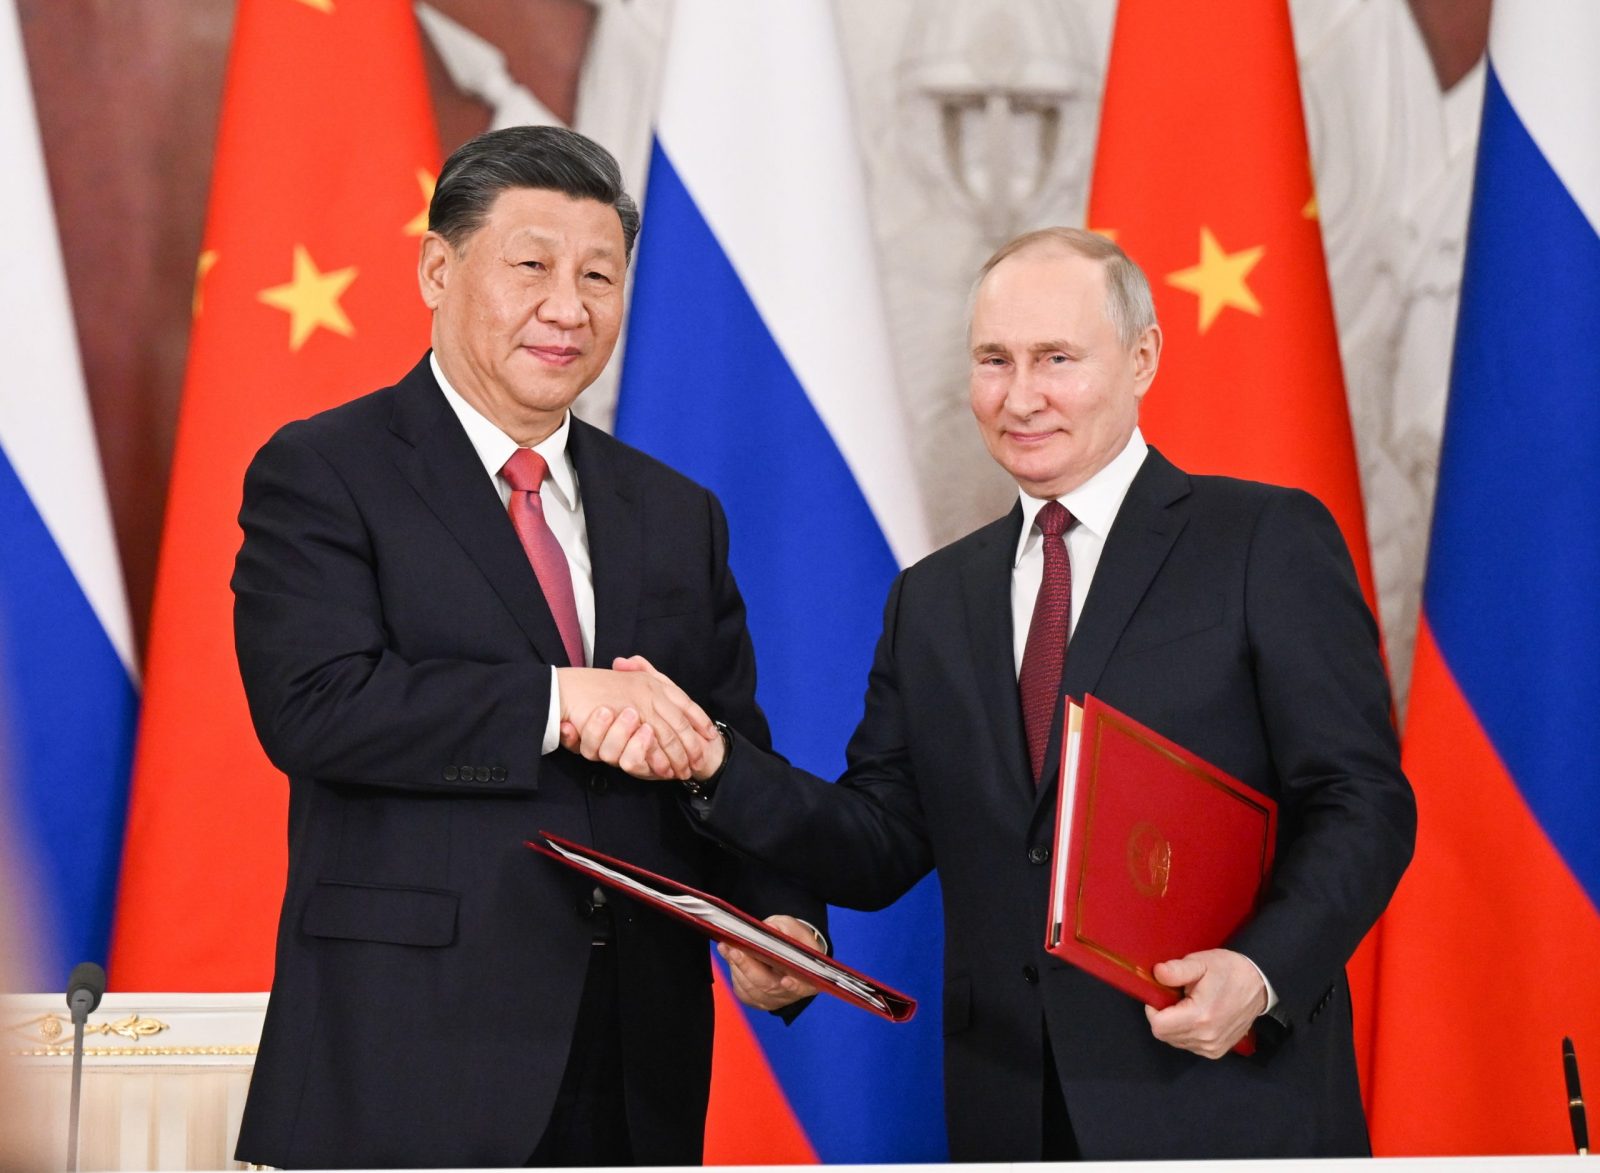 epa10536292 Chinese President Xi Jinping and Russian President Vladimir Putin shake hands after jointly signing a Joint Statement of the People's Republic of China and the Russian Federation on 'Deepening the Comprehensive Strategic Partnership of Coordination for the New Era' and a Joint Statement of the President of the People's Republic of China and the President of the Russian Federation on 'Pre-2030 Development Plan on Priorities in China-Russia Economic Cooperation' in Moscow, Russia, 21 March 2023 (issued 22 March 2023). Xi held talks with Putin at the Kremlin in Moscow.  EPA/XINHUA / Xie Huanchi CHINA OUT / MANDATORY CREDIT  EDITORIAL USE ONLY